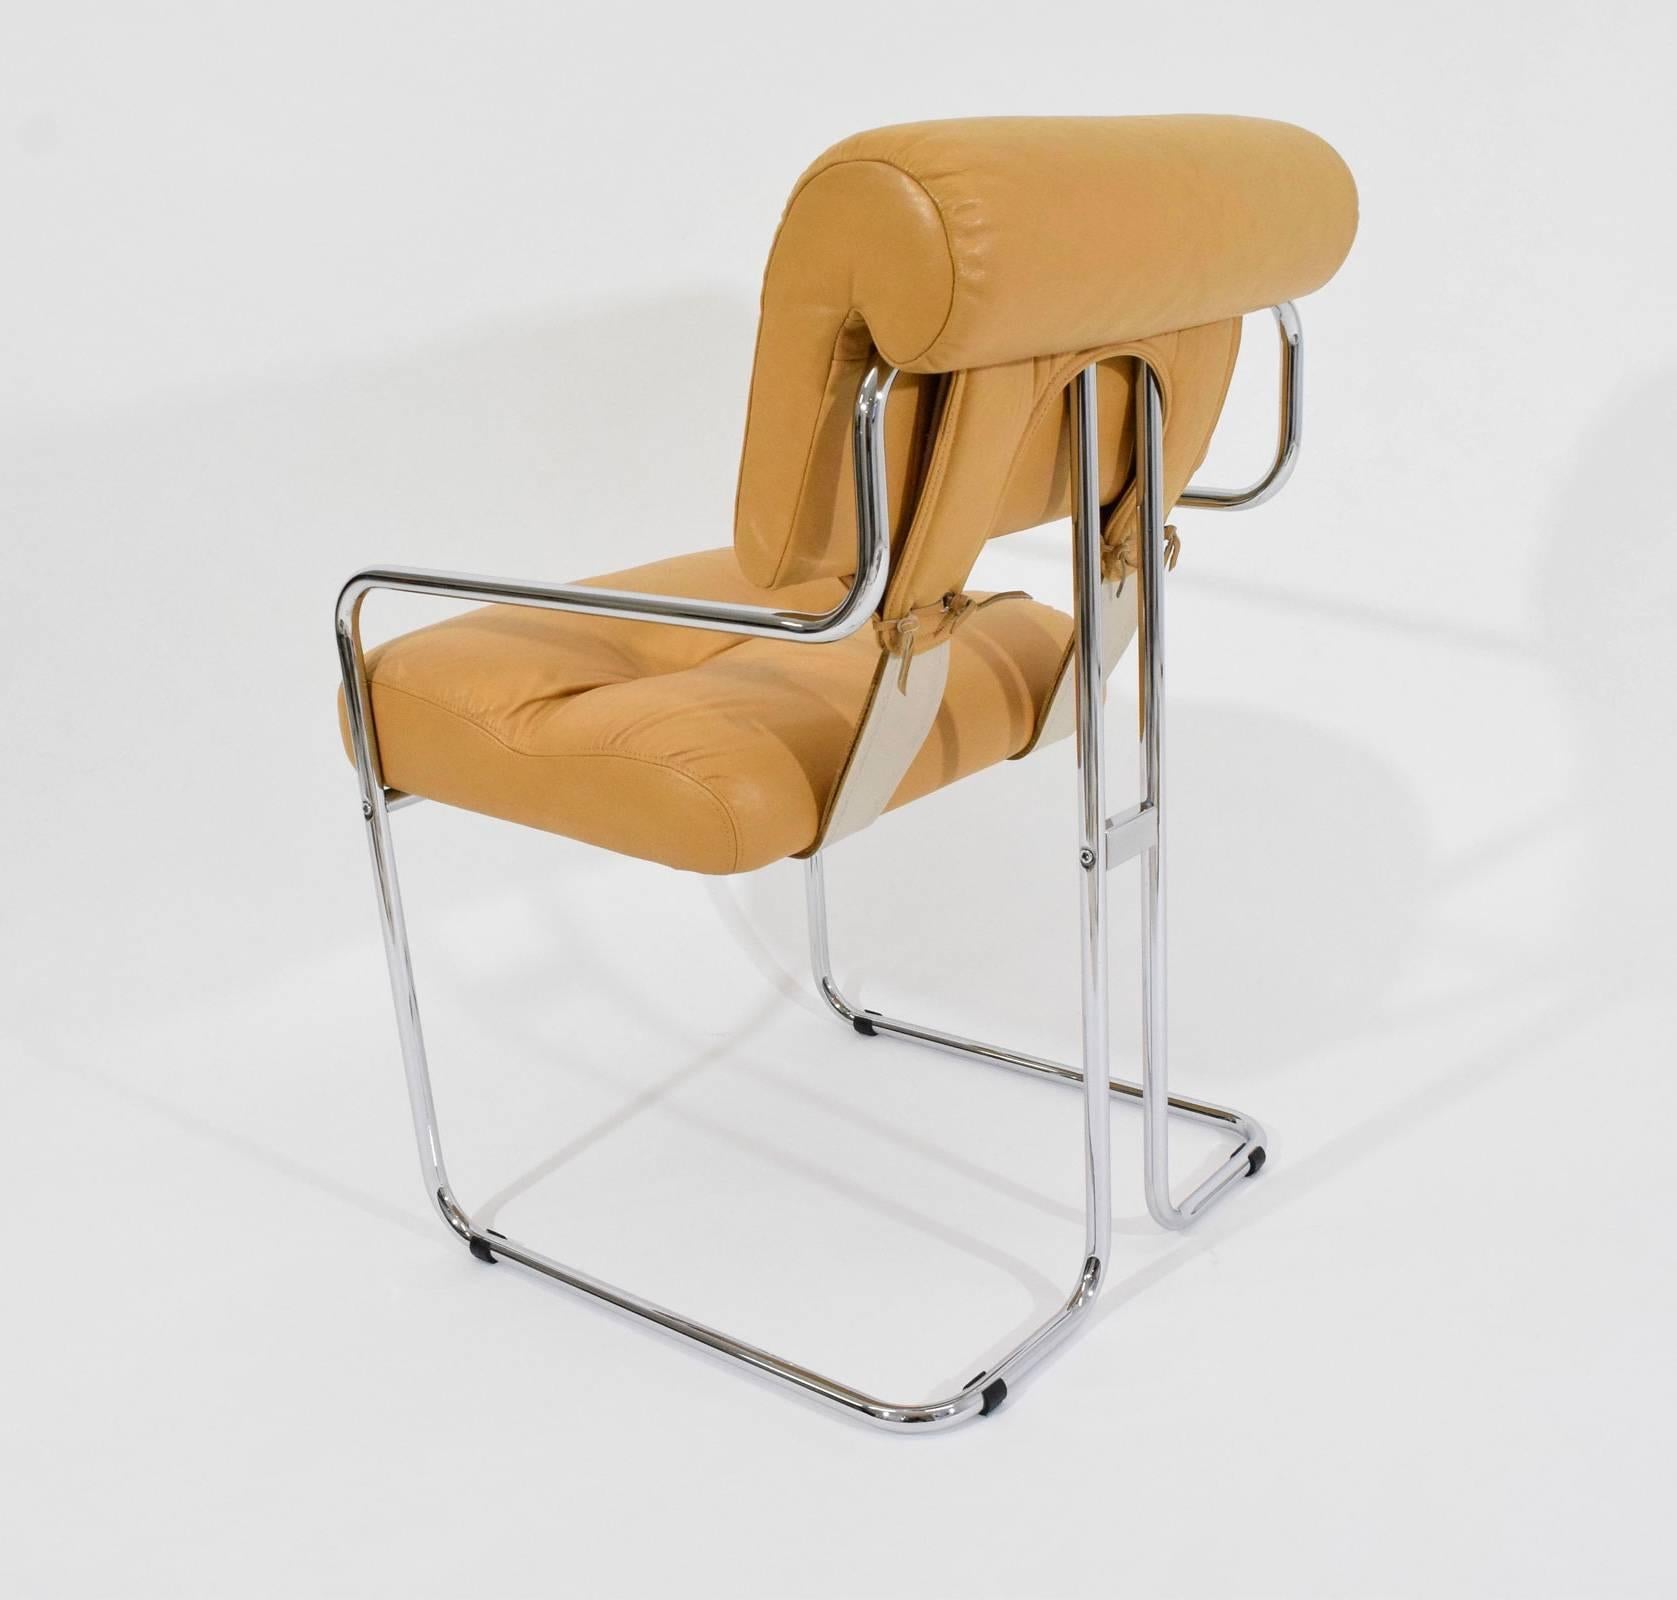 Single leather Tucroma chair by Guido Faleschini for Pace.